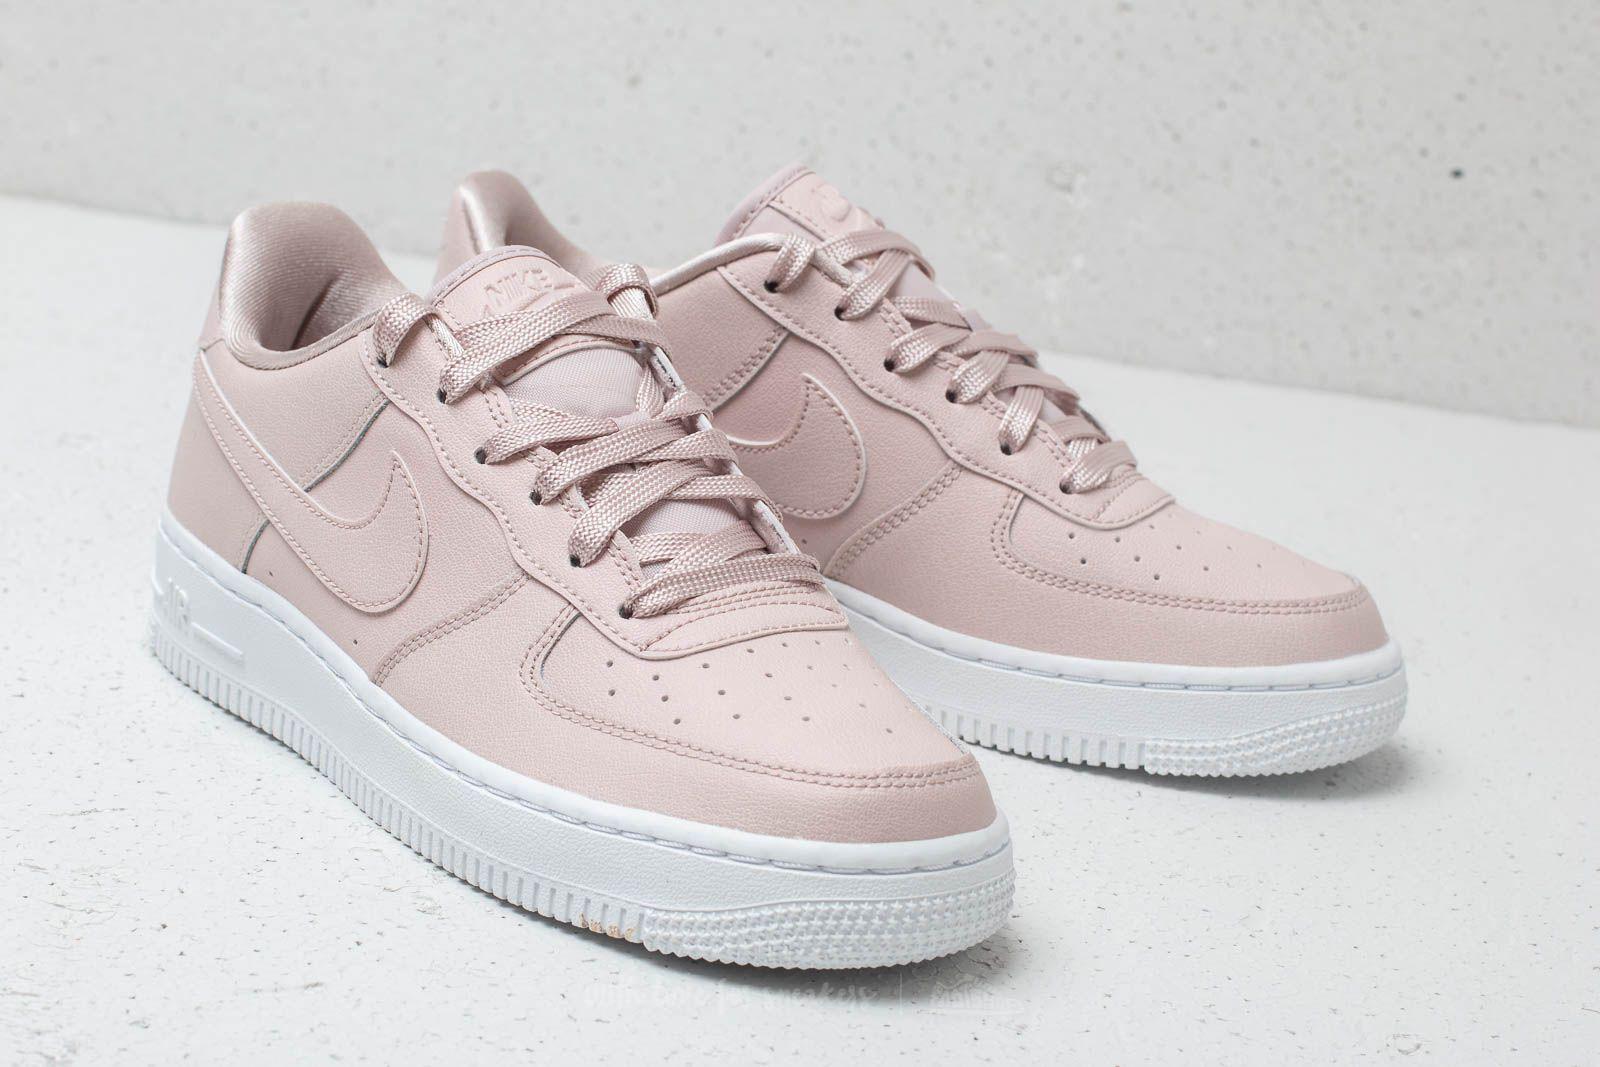 nike air force one ss - 58% remise - www.muminlerotomotiv.com.tr